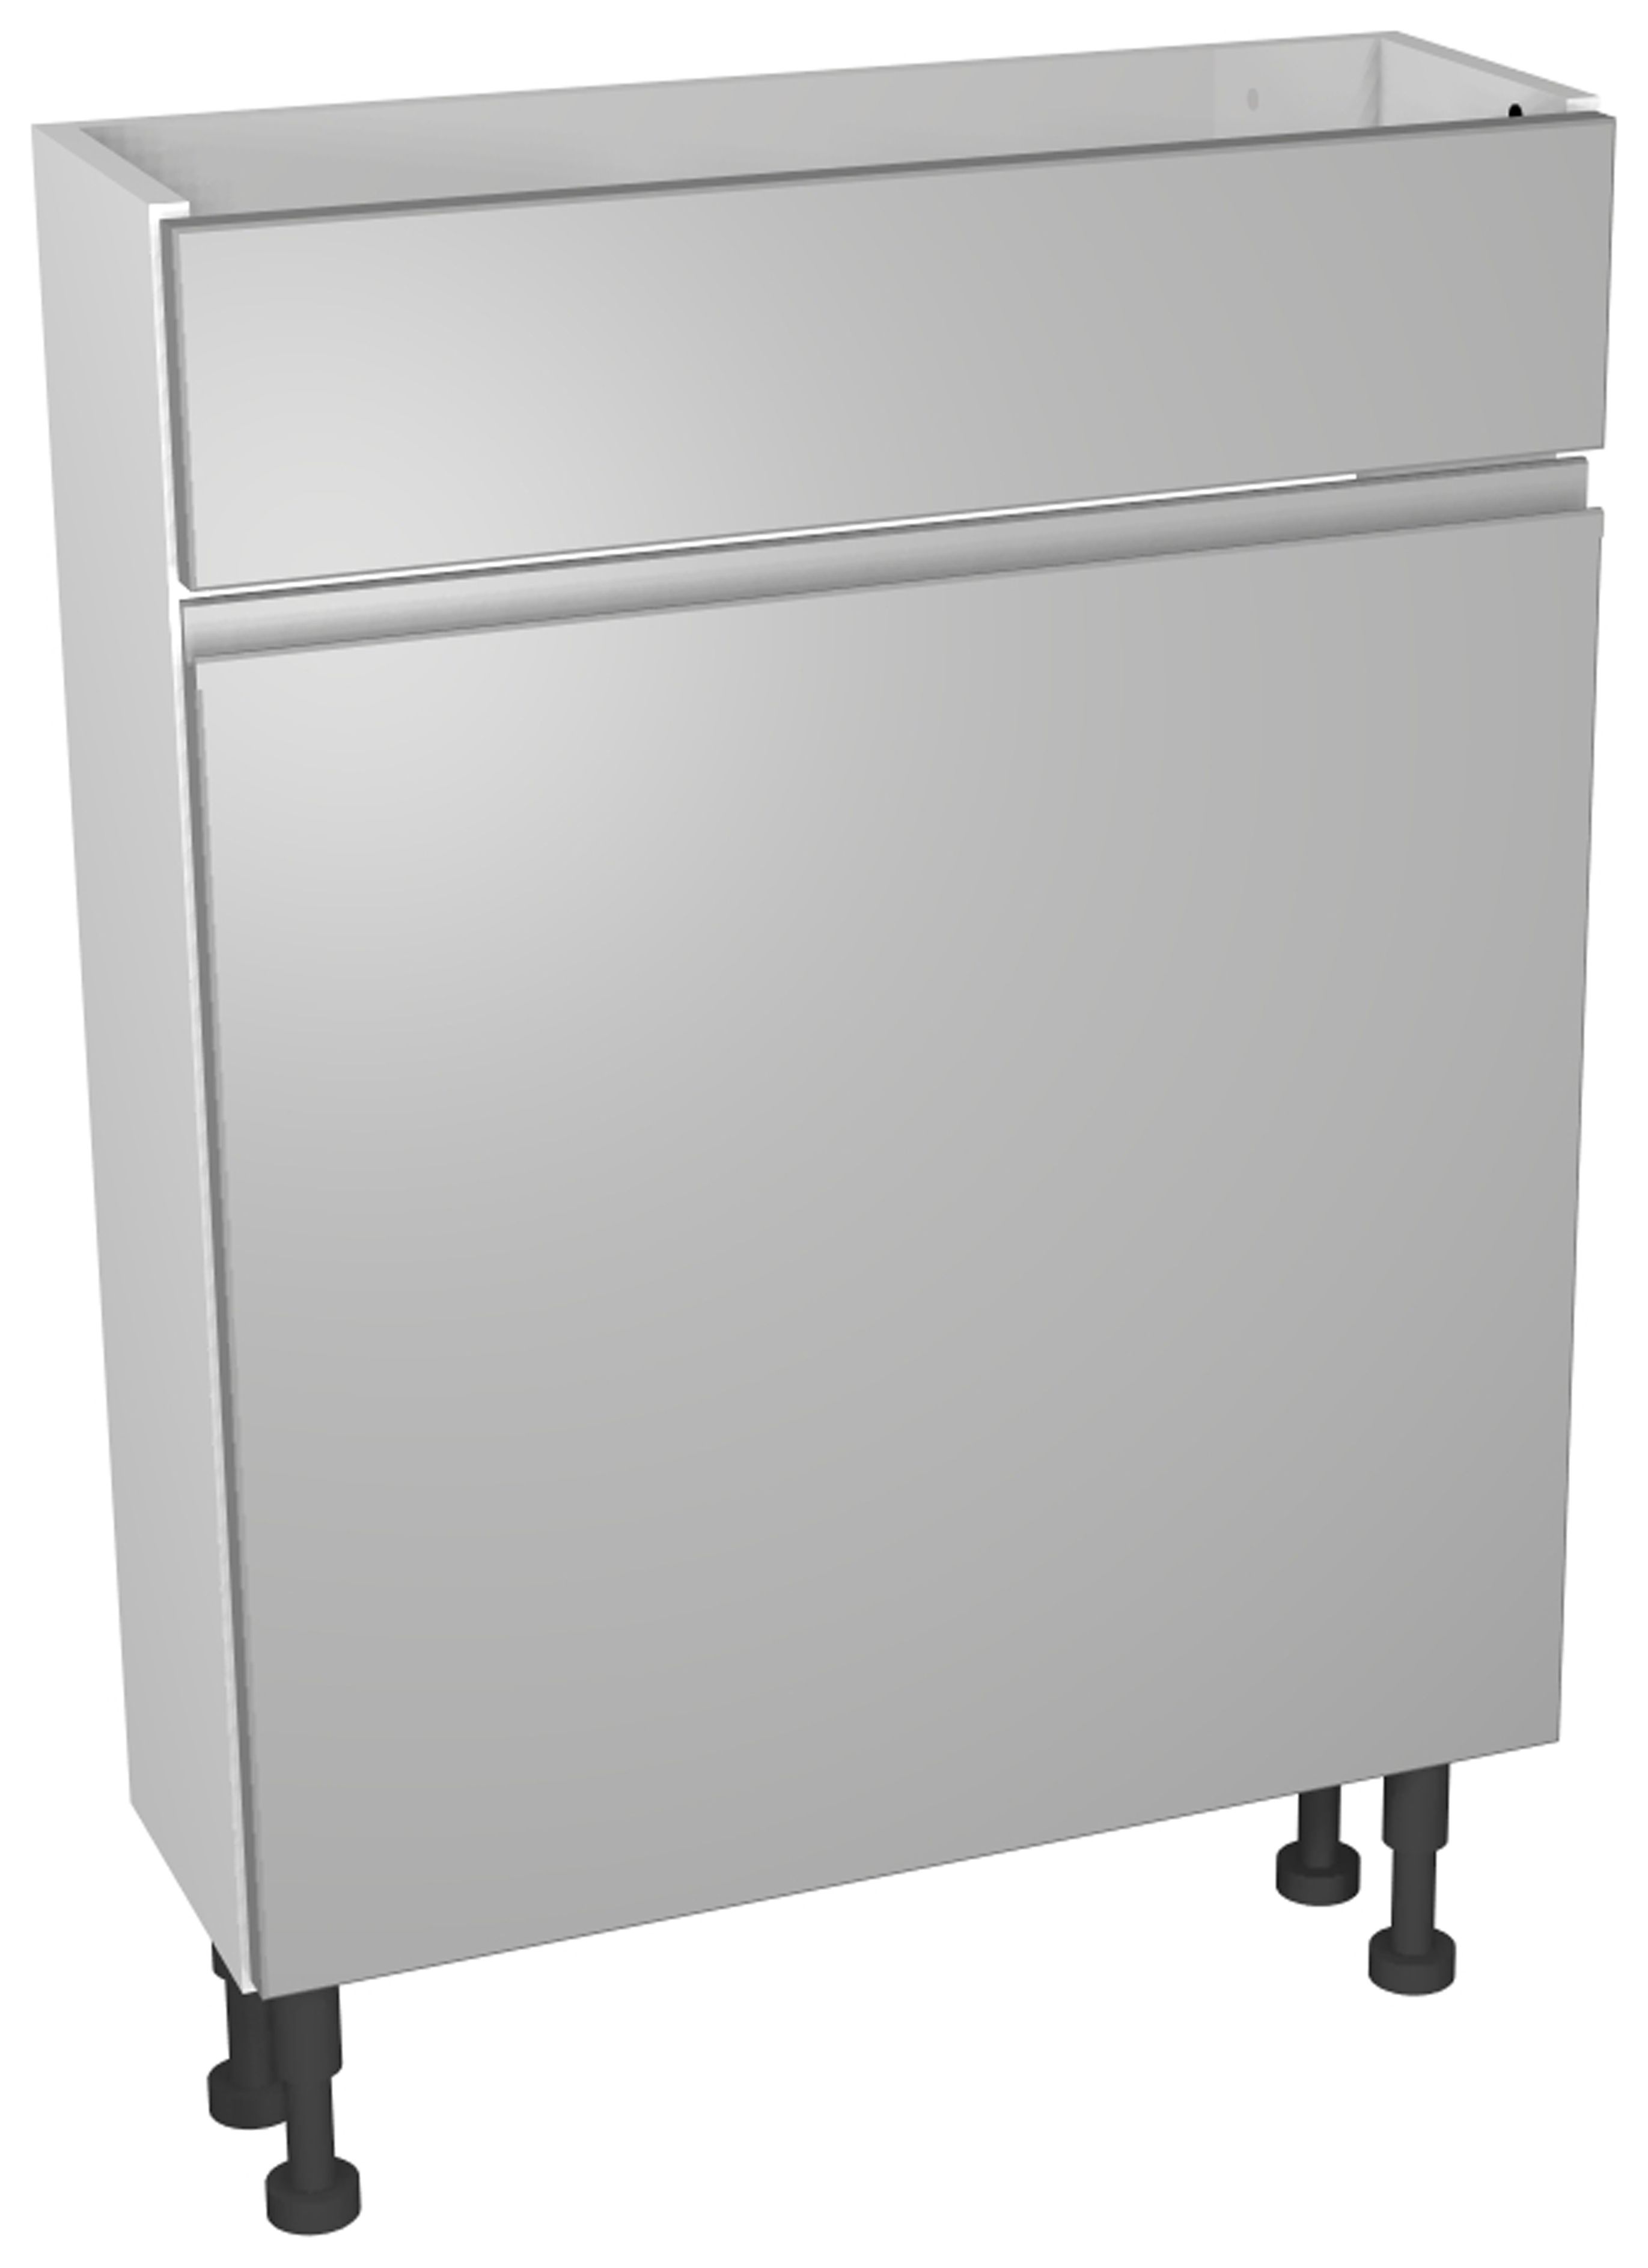 Image of Wickes Hertford Dove Grey Compact Toilet Unit - 600 x 735mm